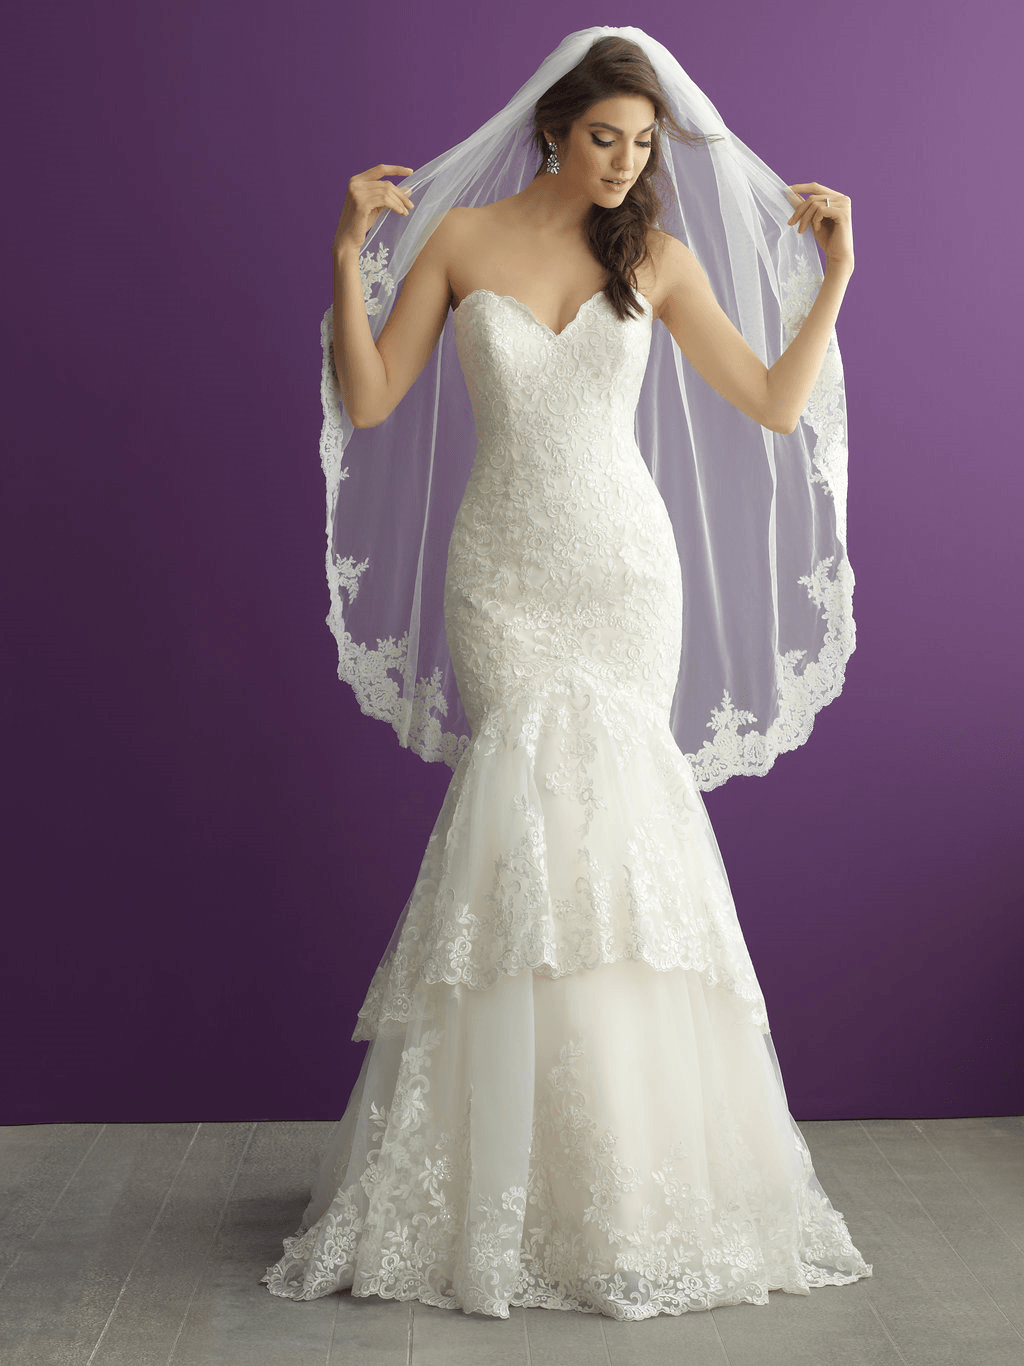 Contact us for a lace fit and flare bridal gown with sweetheart neckline